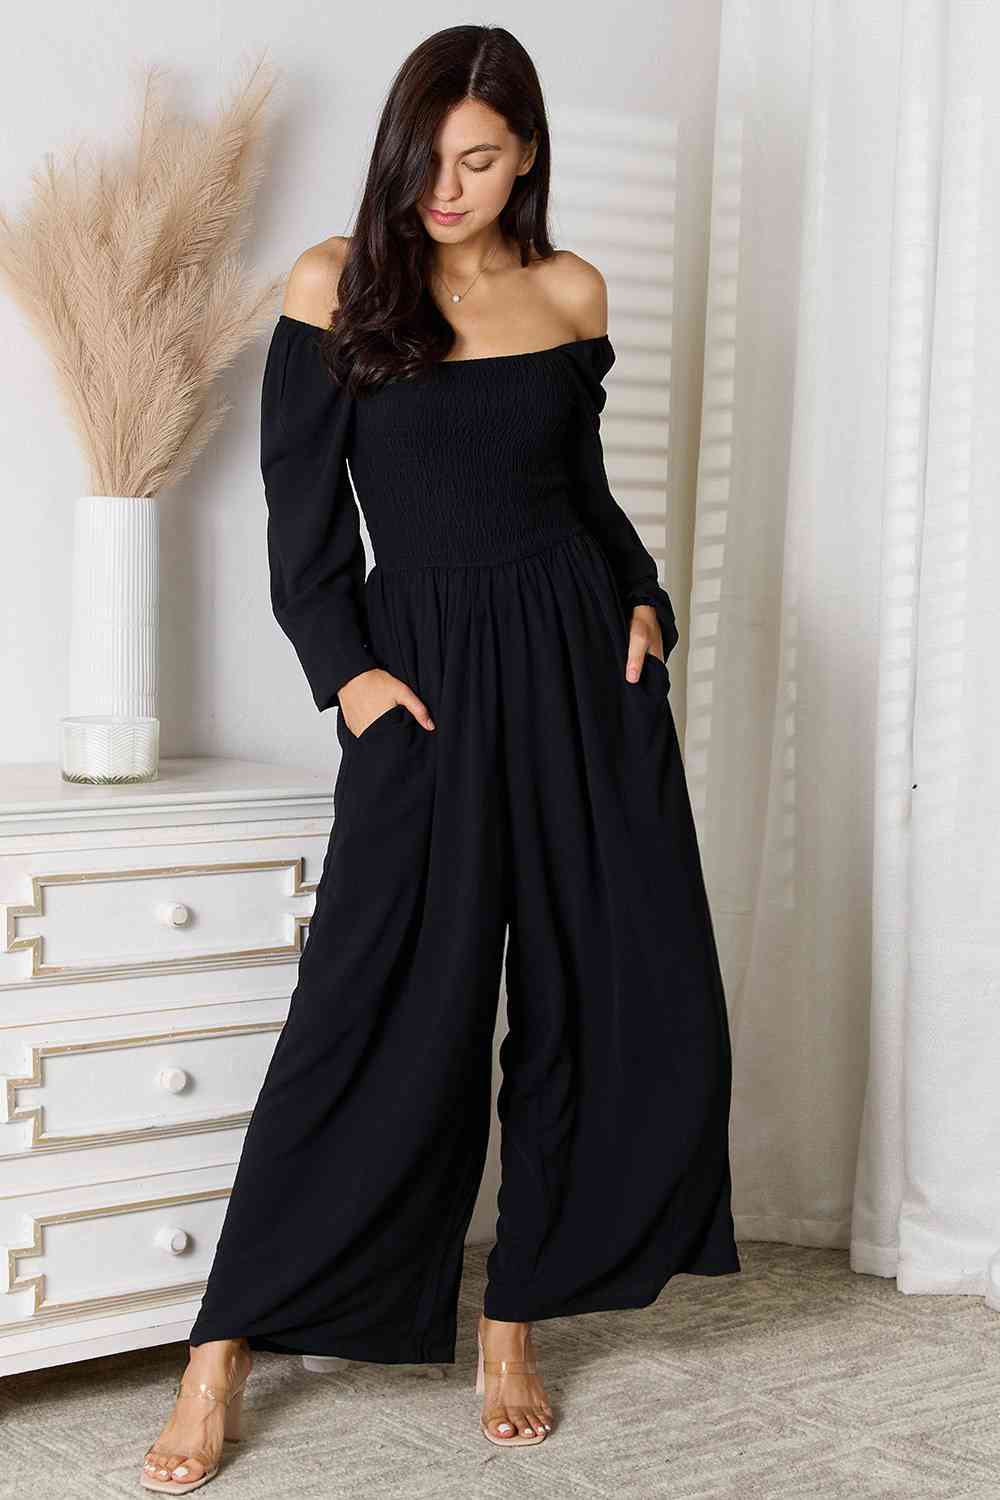 ITEM MUST SHIP -Double Take Square Neck Jumpsuit with Pockets